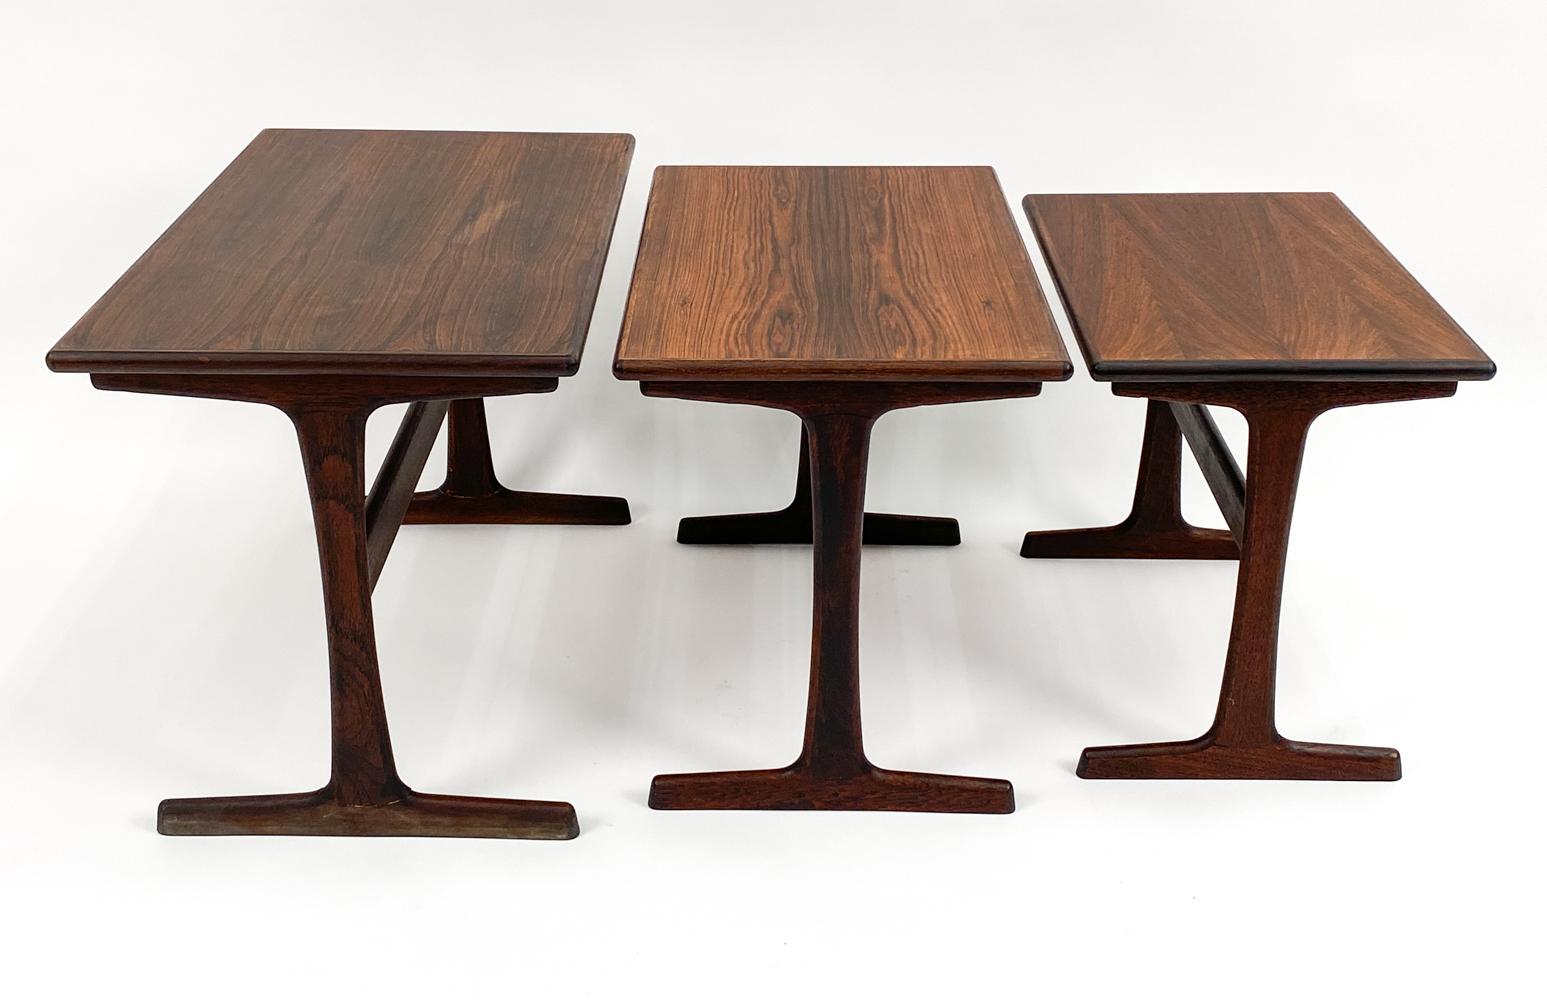 Set of Three Kai Kristiansen VM-143 Rosewood Nesting Tables In Good Condition For Sale In Norwalk, CT